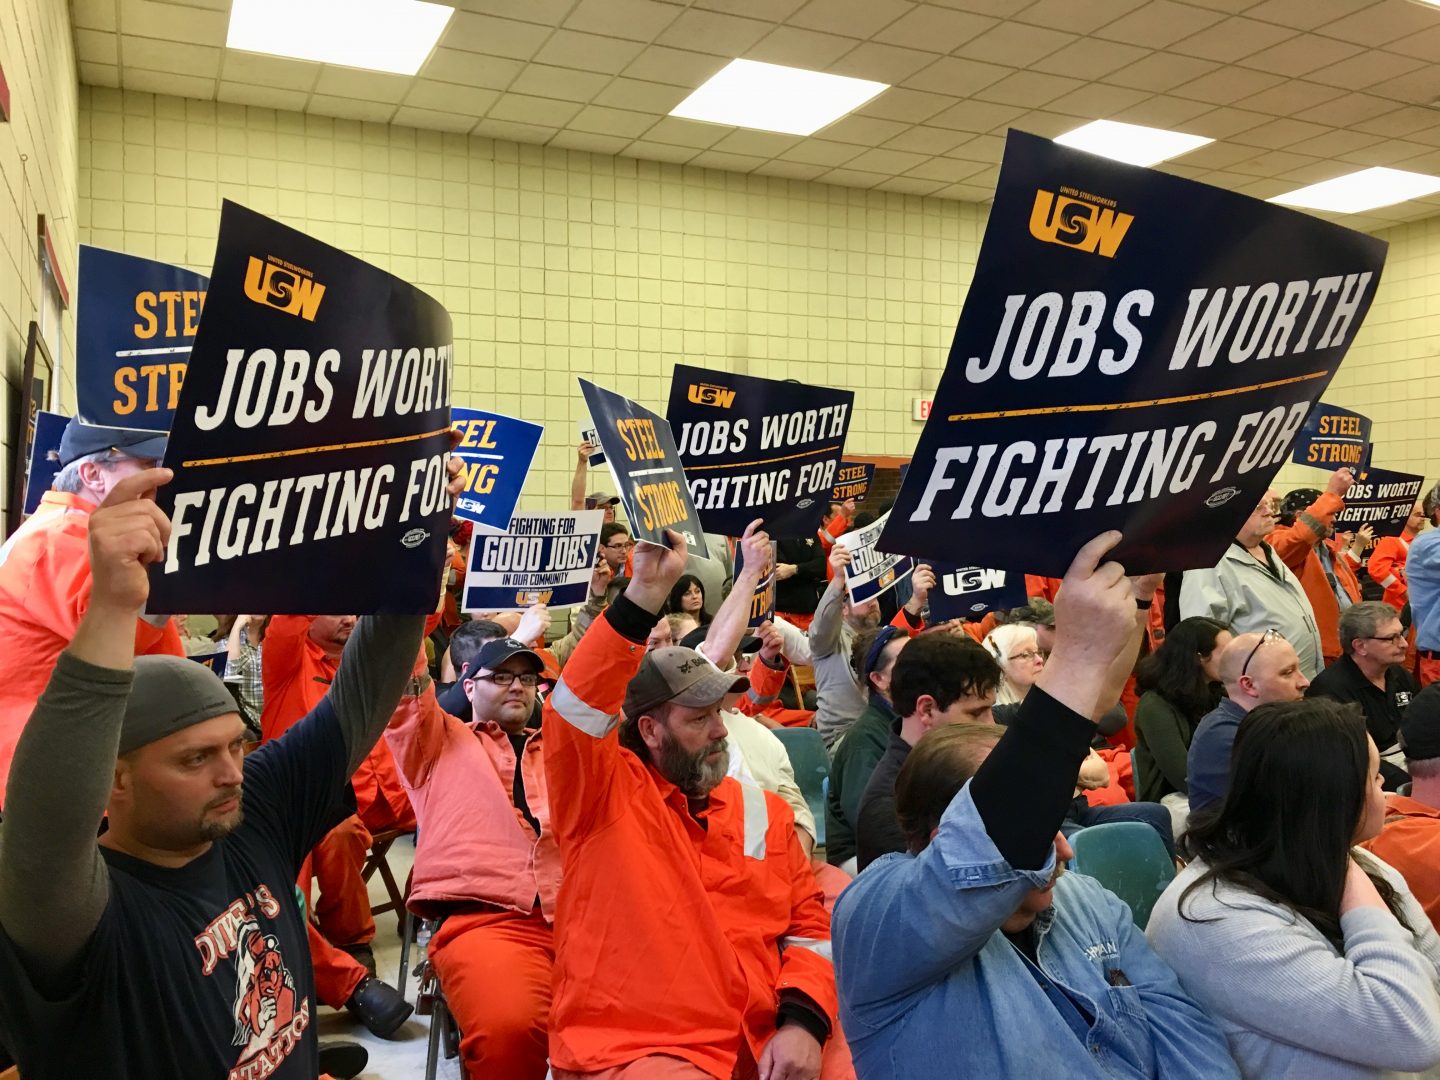 Democratic state lawmakers held a hearing on the Clairton Coke Works fire and subsequent air quality issues Thursday, drawing a large crowd of steelworkers and Mon Valley residents to the Clairton Municipal Building.